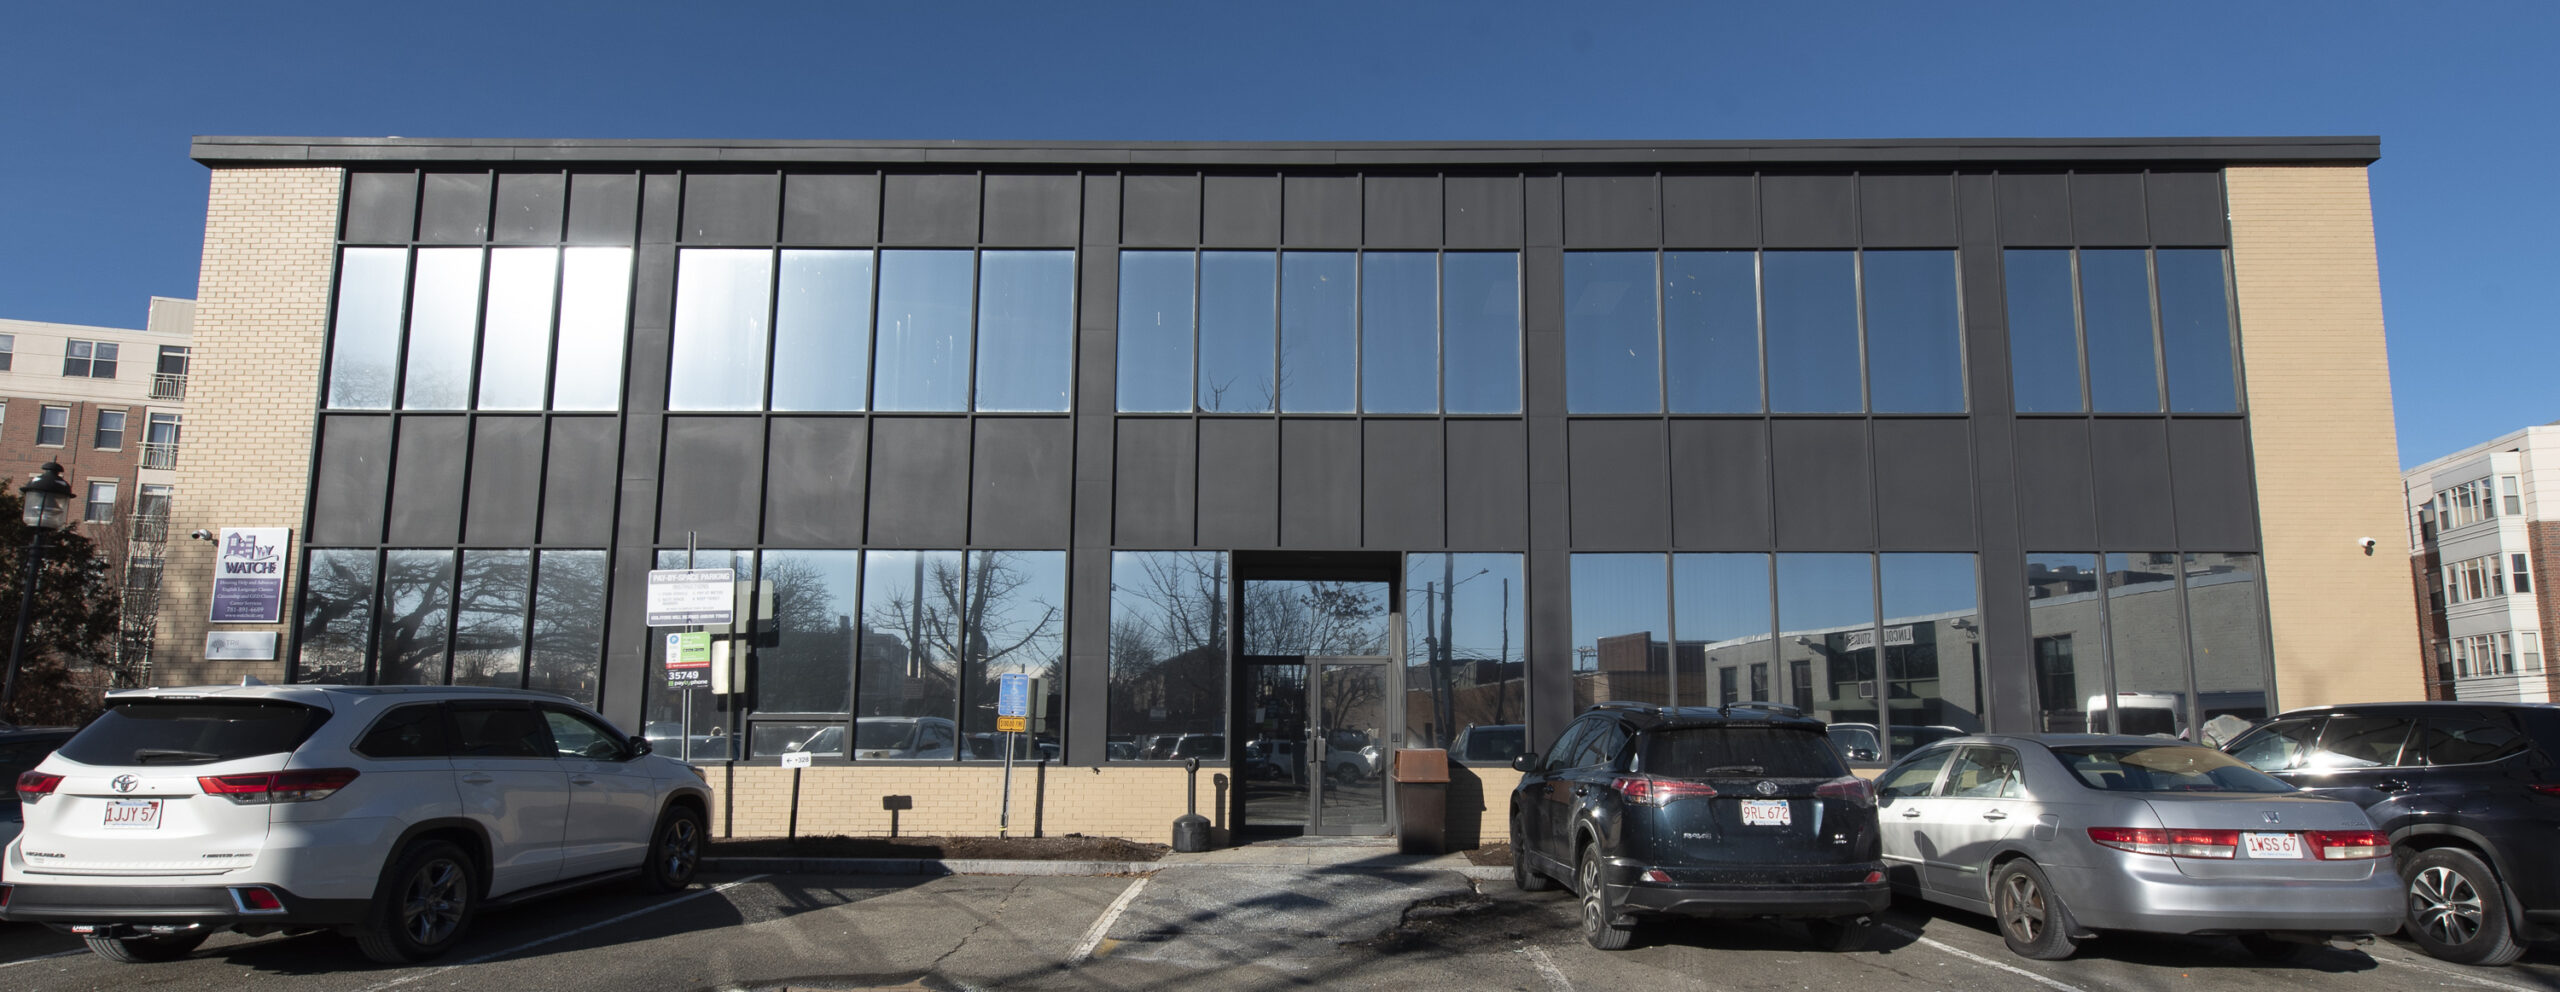 rear parking lot for office building at 24 Crescent Street in Waltham MA